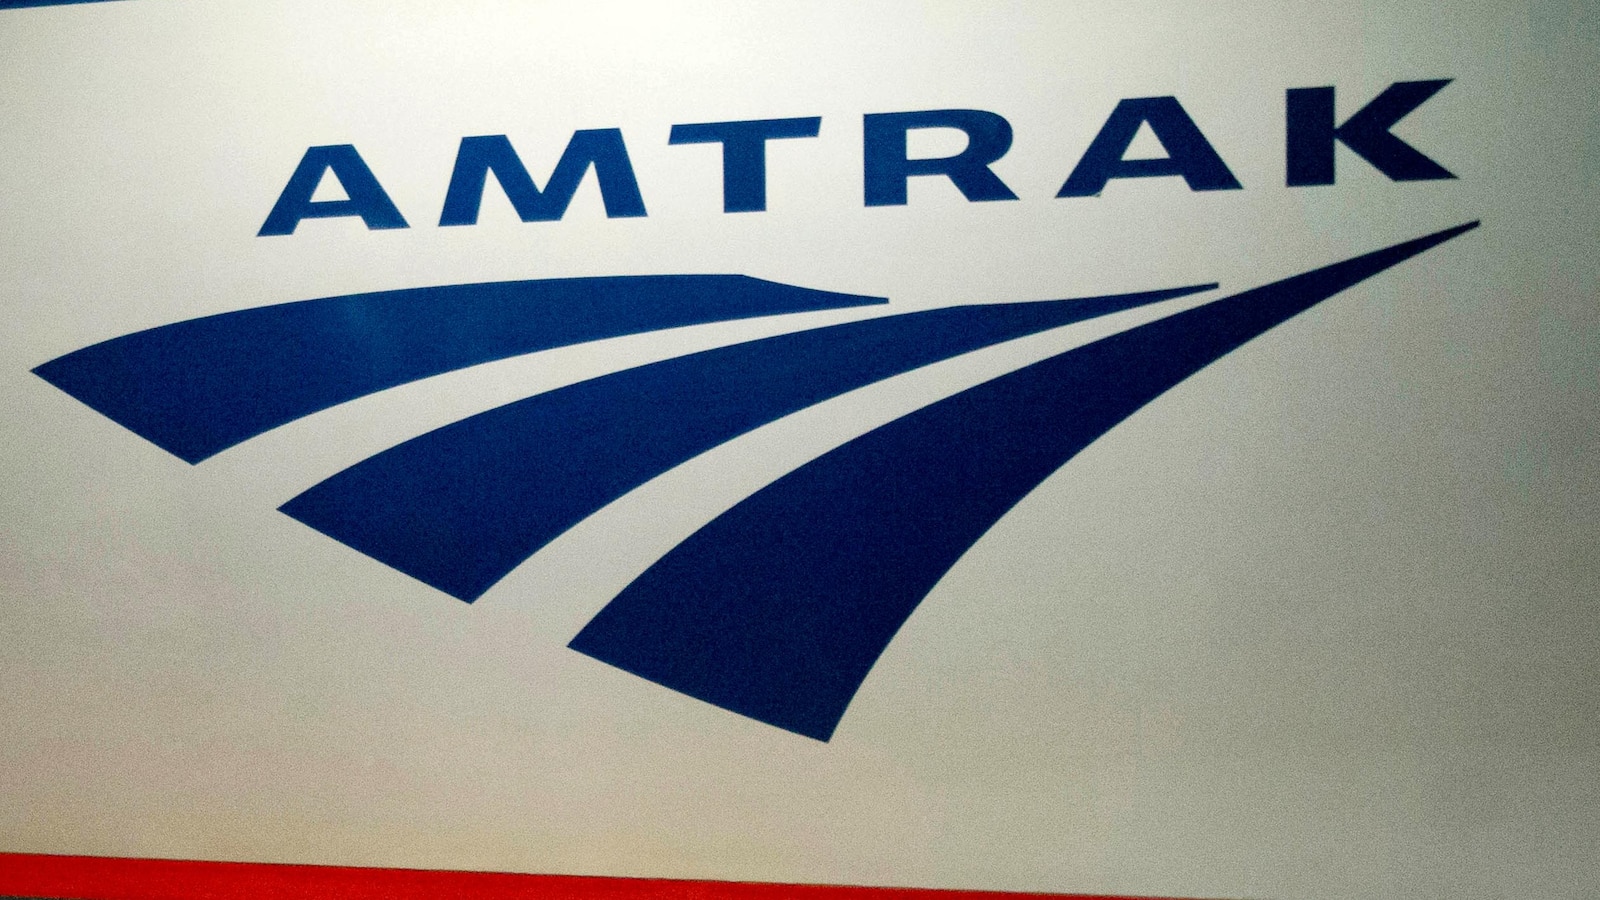 Amtrak service between New York City and Boston temporarily suspended